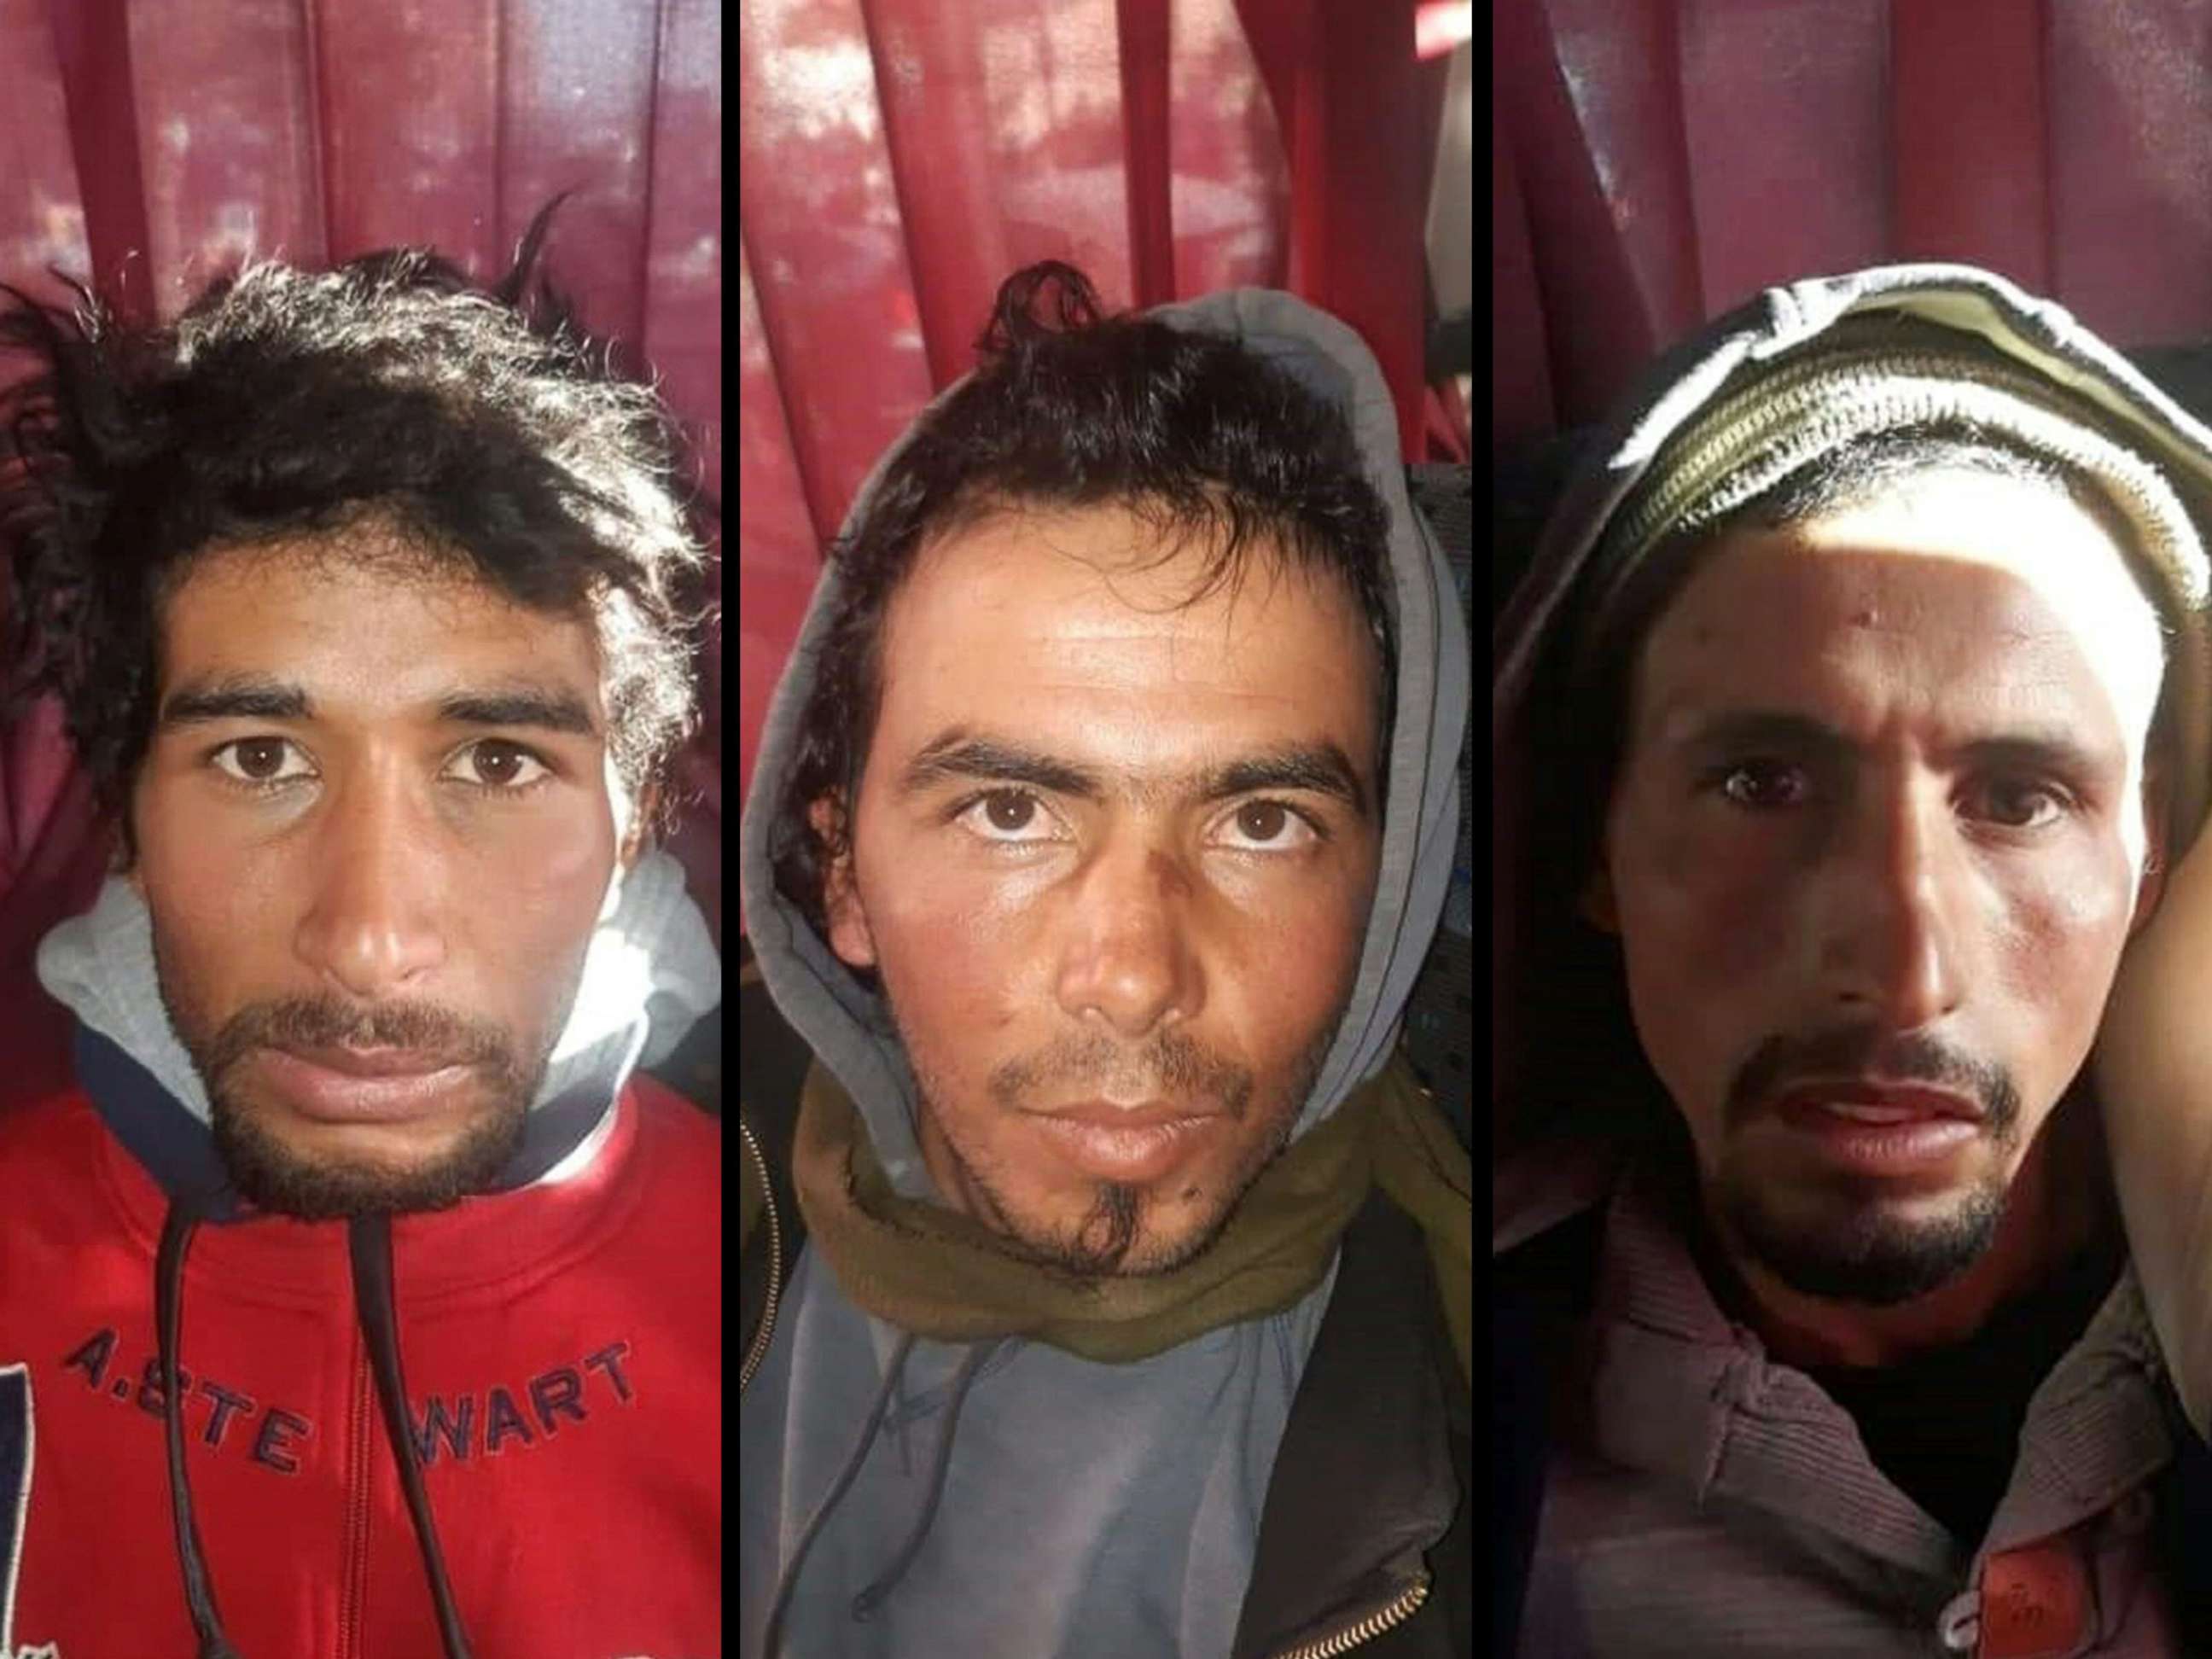 PHOTO: This combination image shows, from left, Rachid Afatti, Ouziad Younes, and Ejjoud Abdessamad, the three suspects in the murder of two Scandinavian hikers whose bodies were found at a camp in Morocco's High Atlas mountains, following their arrest.